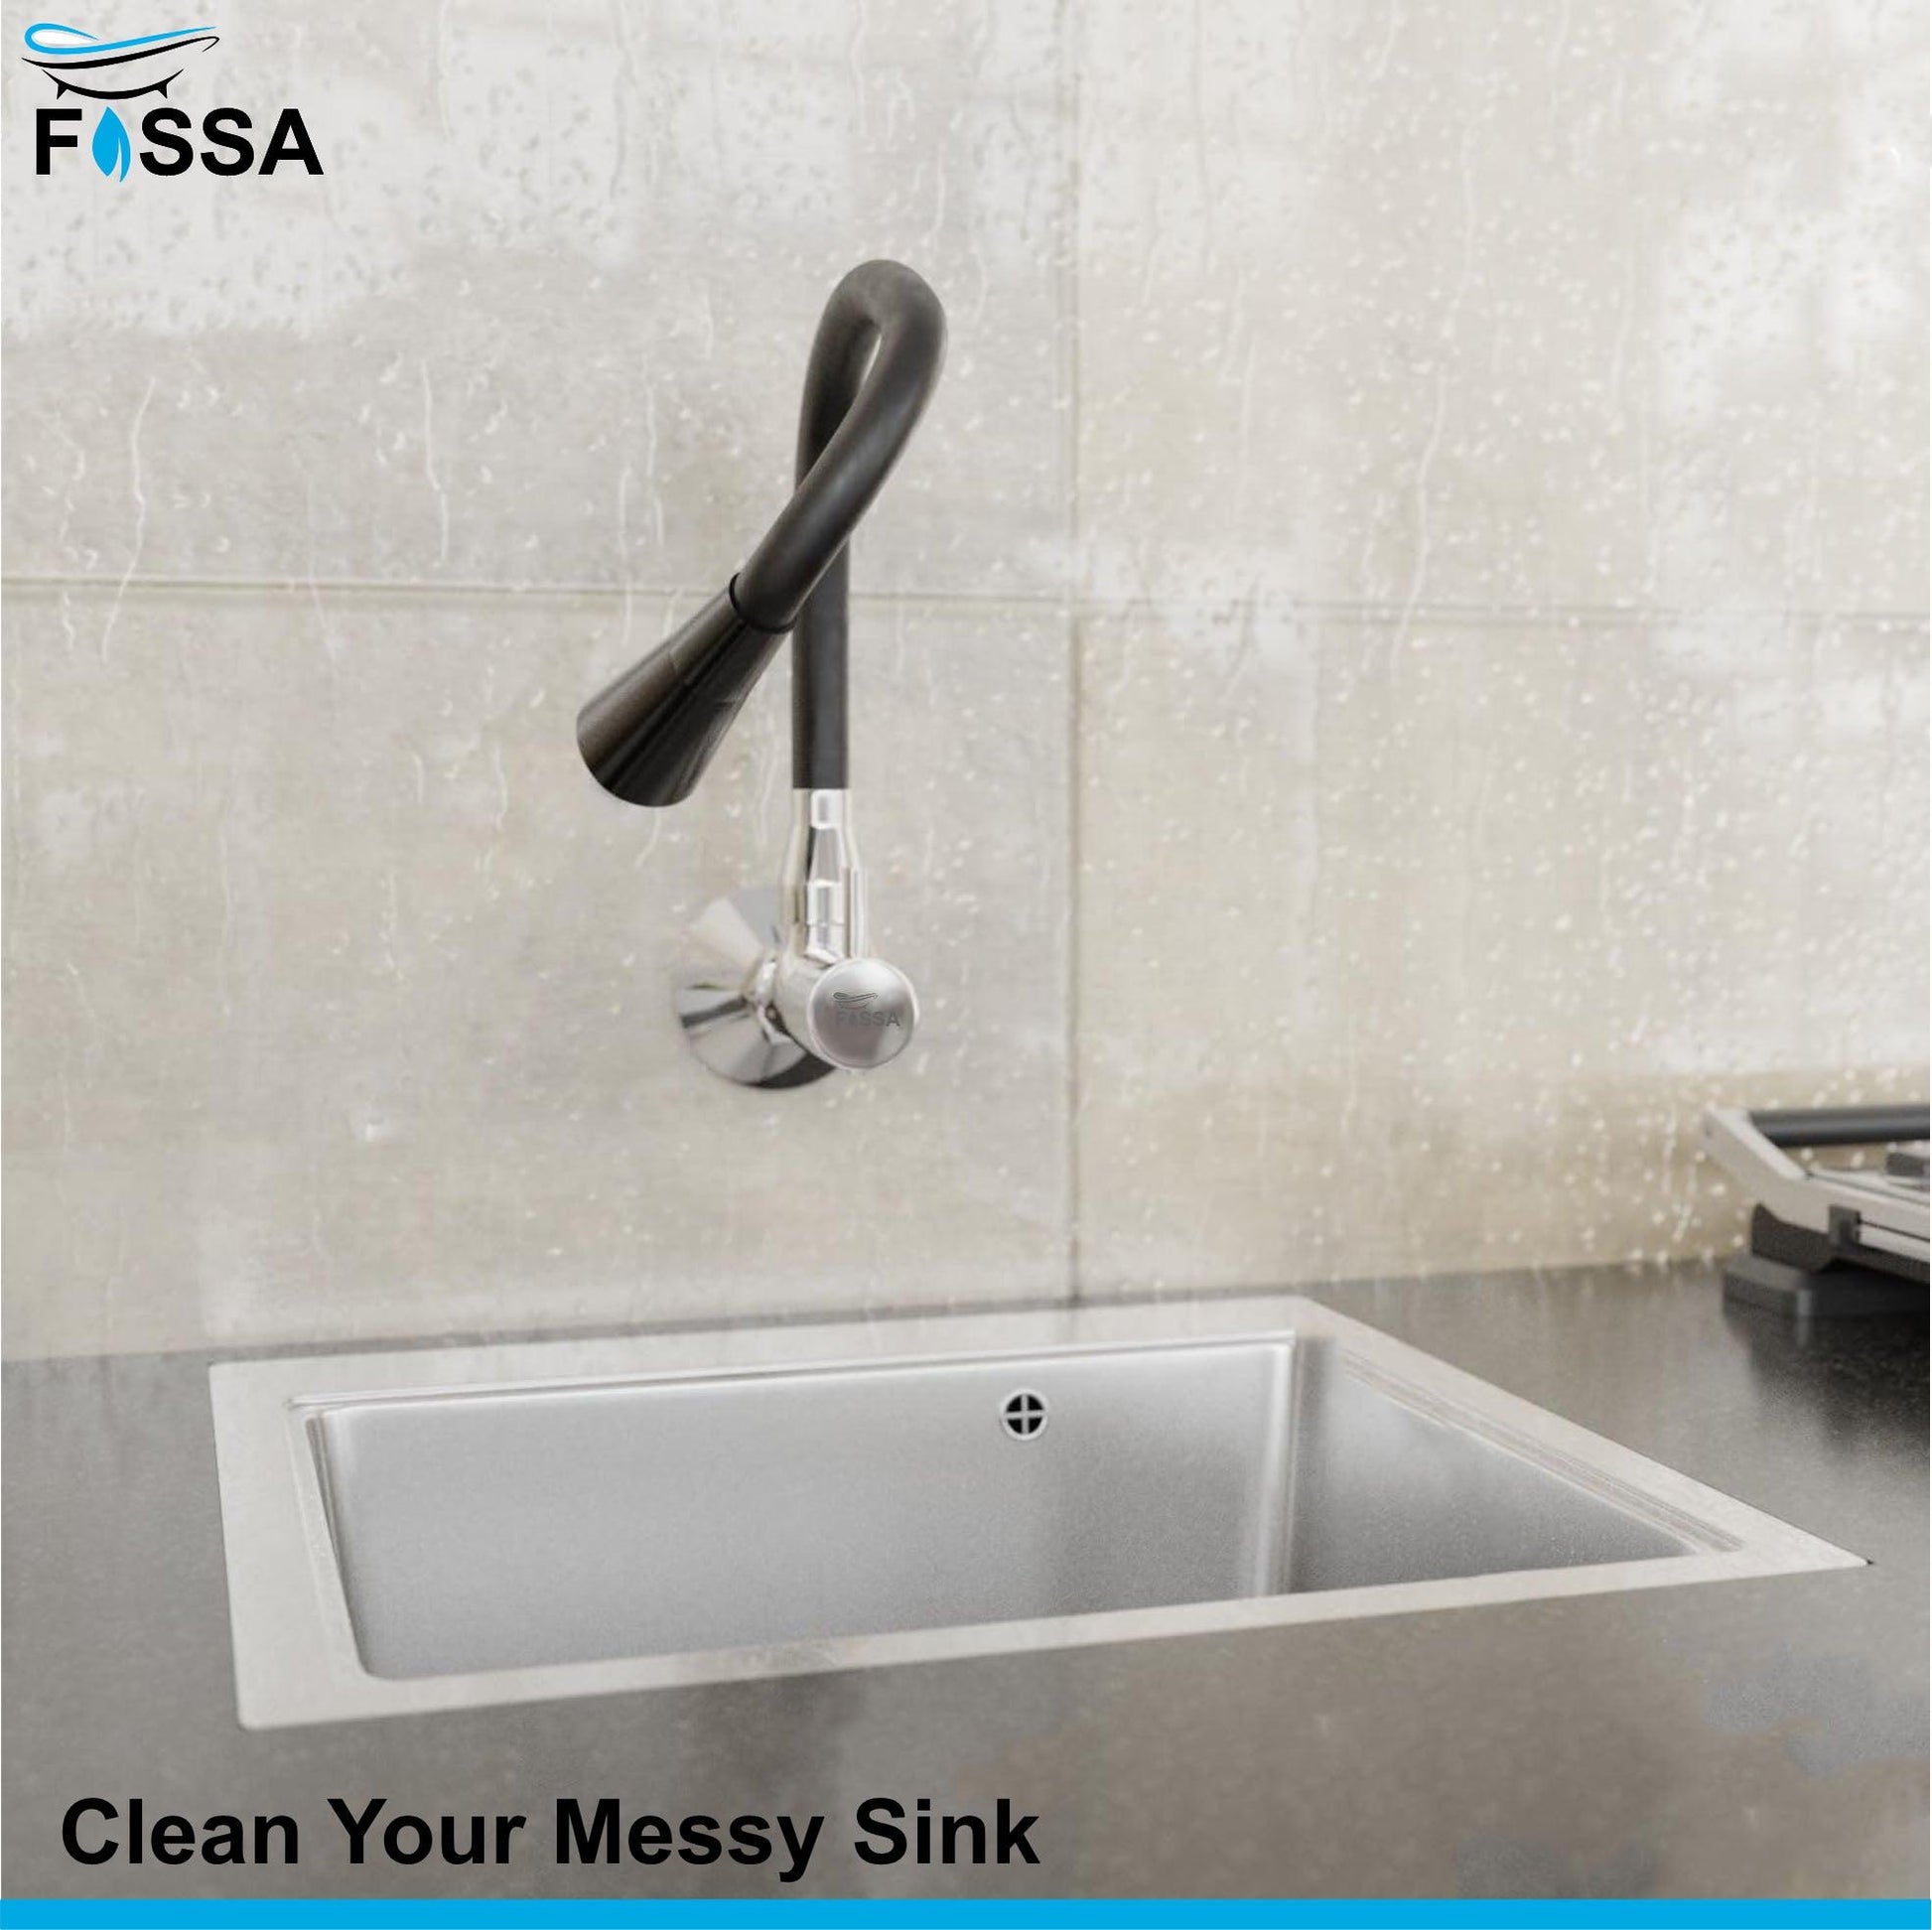 Fossa Brass Sink Cock with Dual Flow Kitchen Faucet with Flexible Swivel Spout (Black) - Fossa Home 